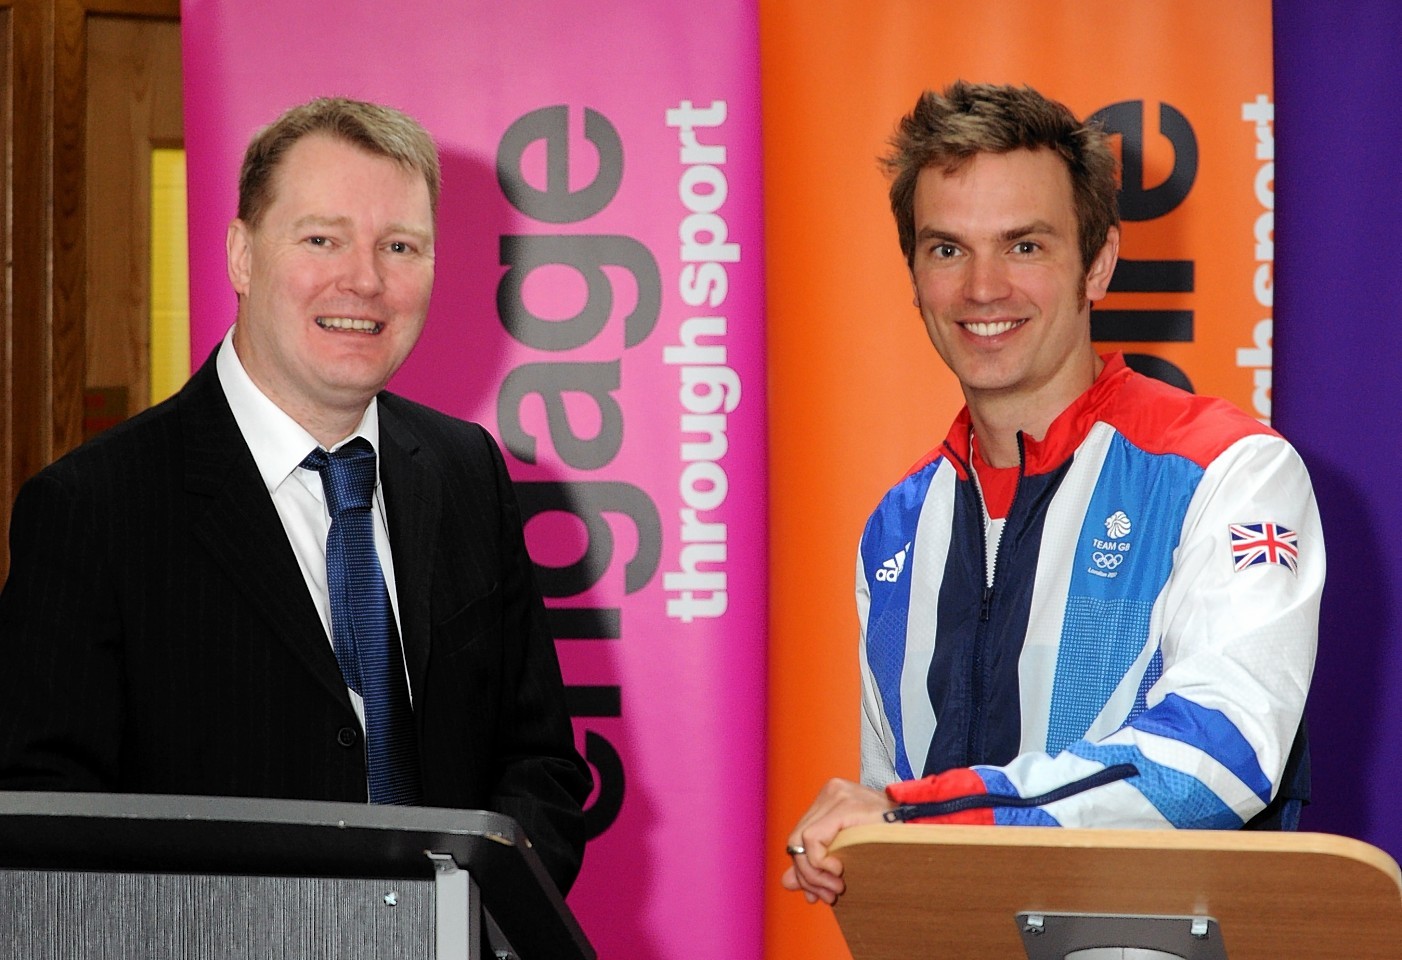 Aberdeen chief executive Duncan Fraser and Olympic gold medal canoeist Tim Baillie